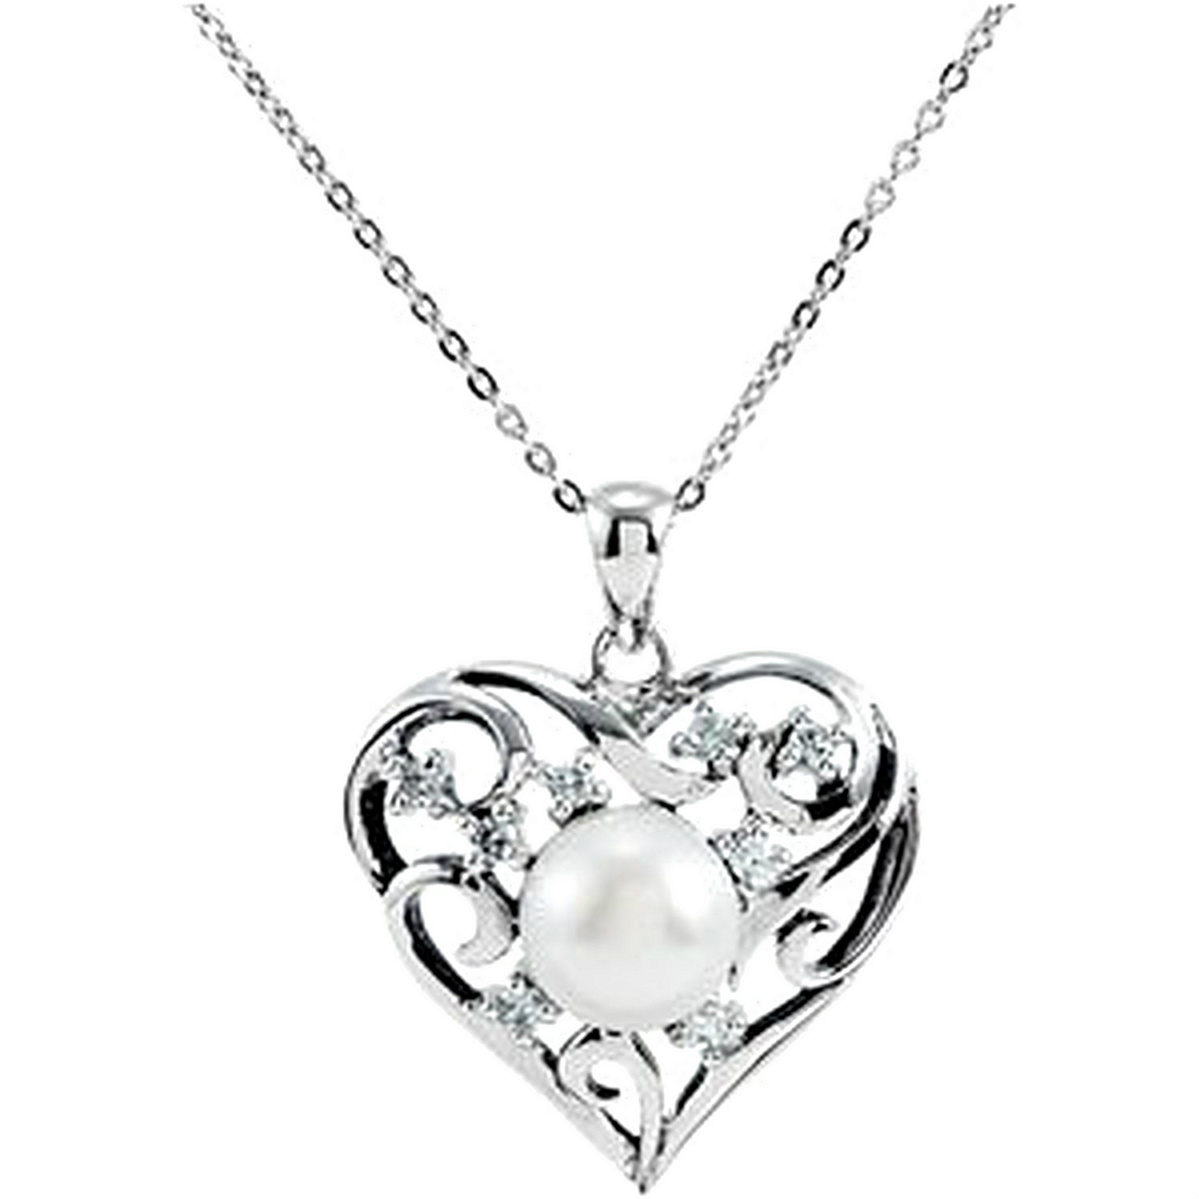 Filigree Pearl Heart Necklace, 18"